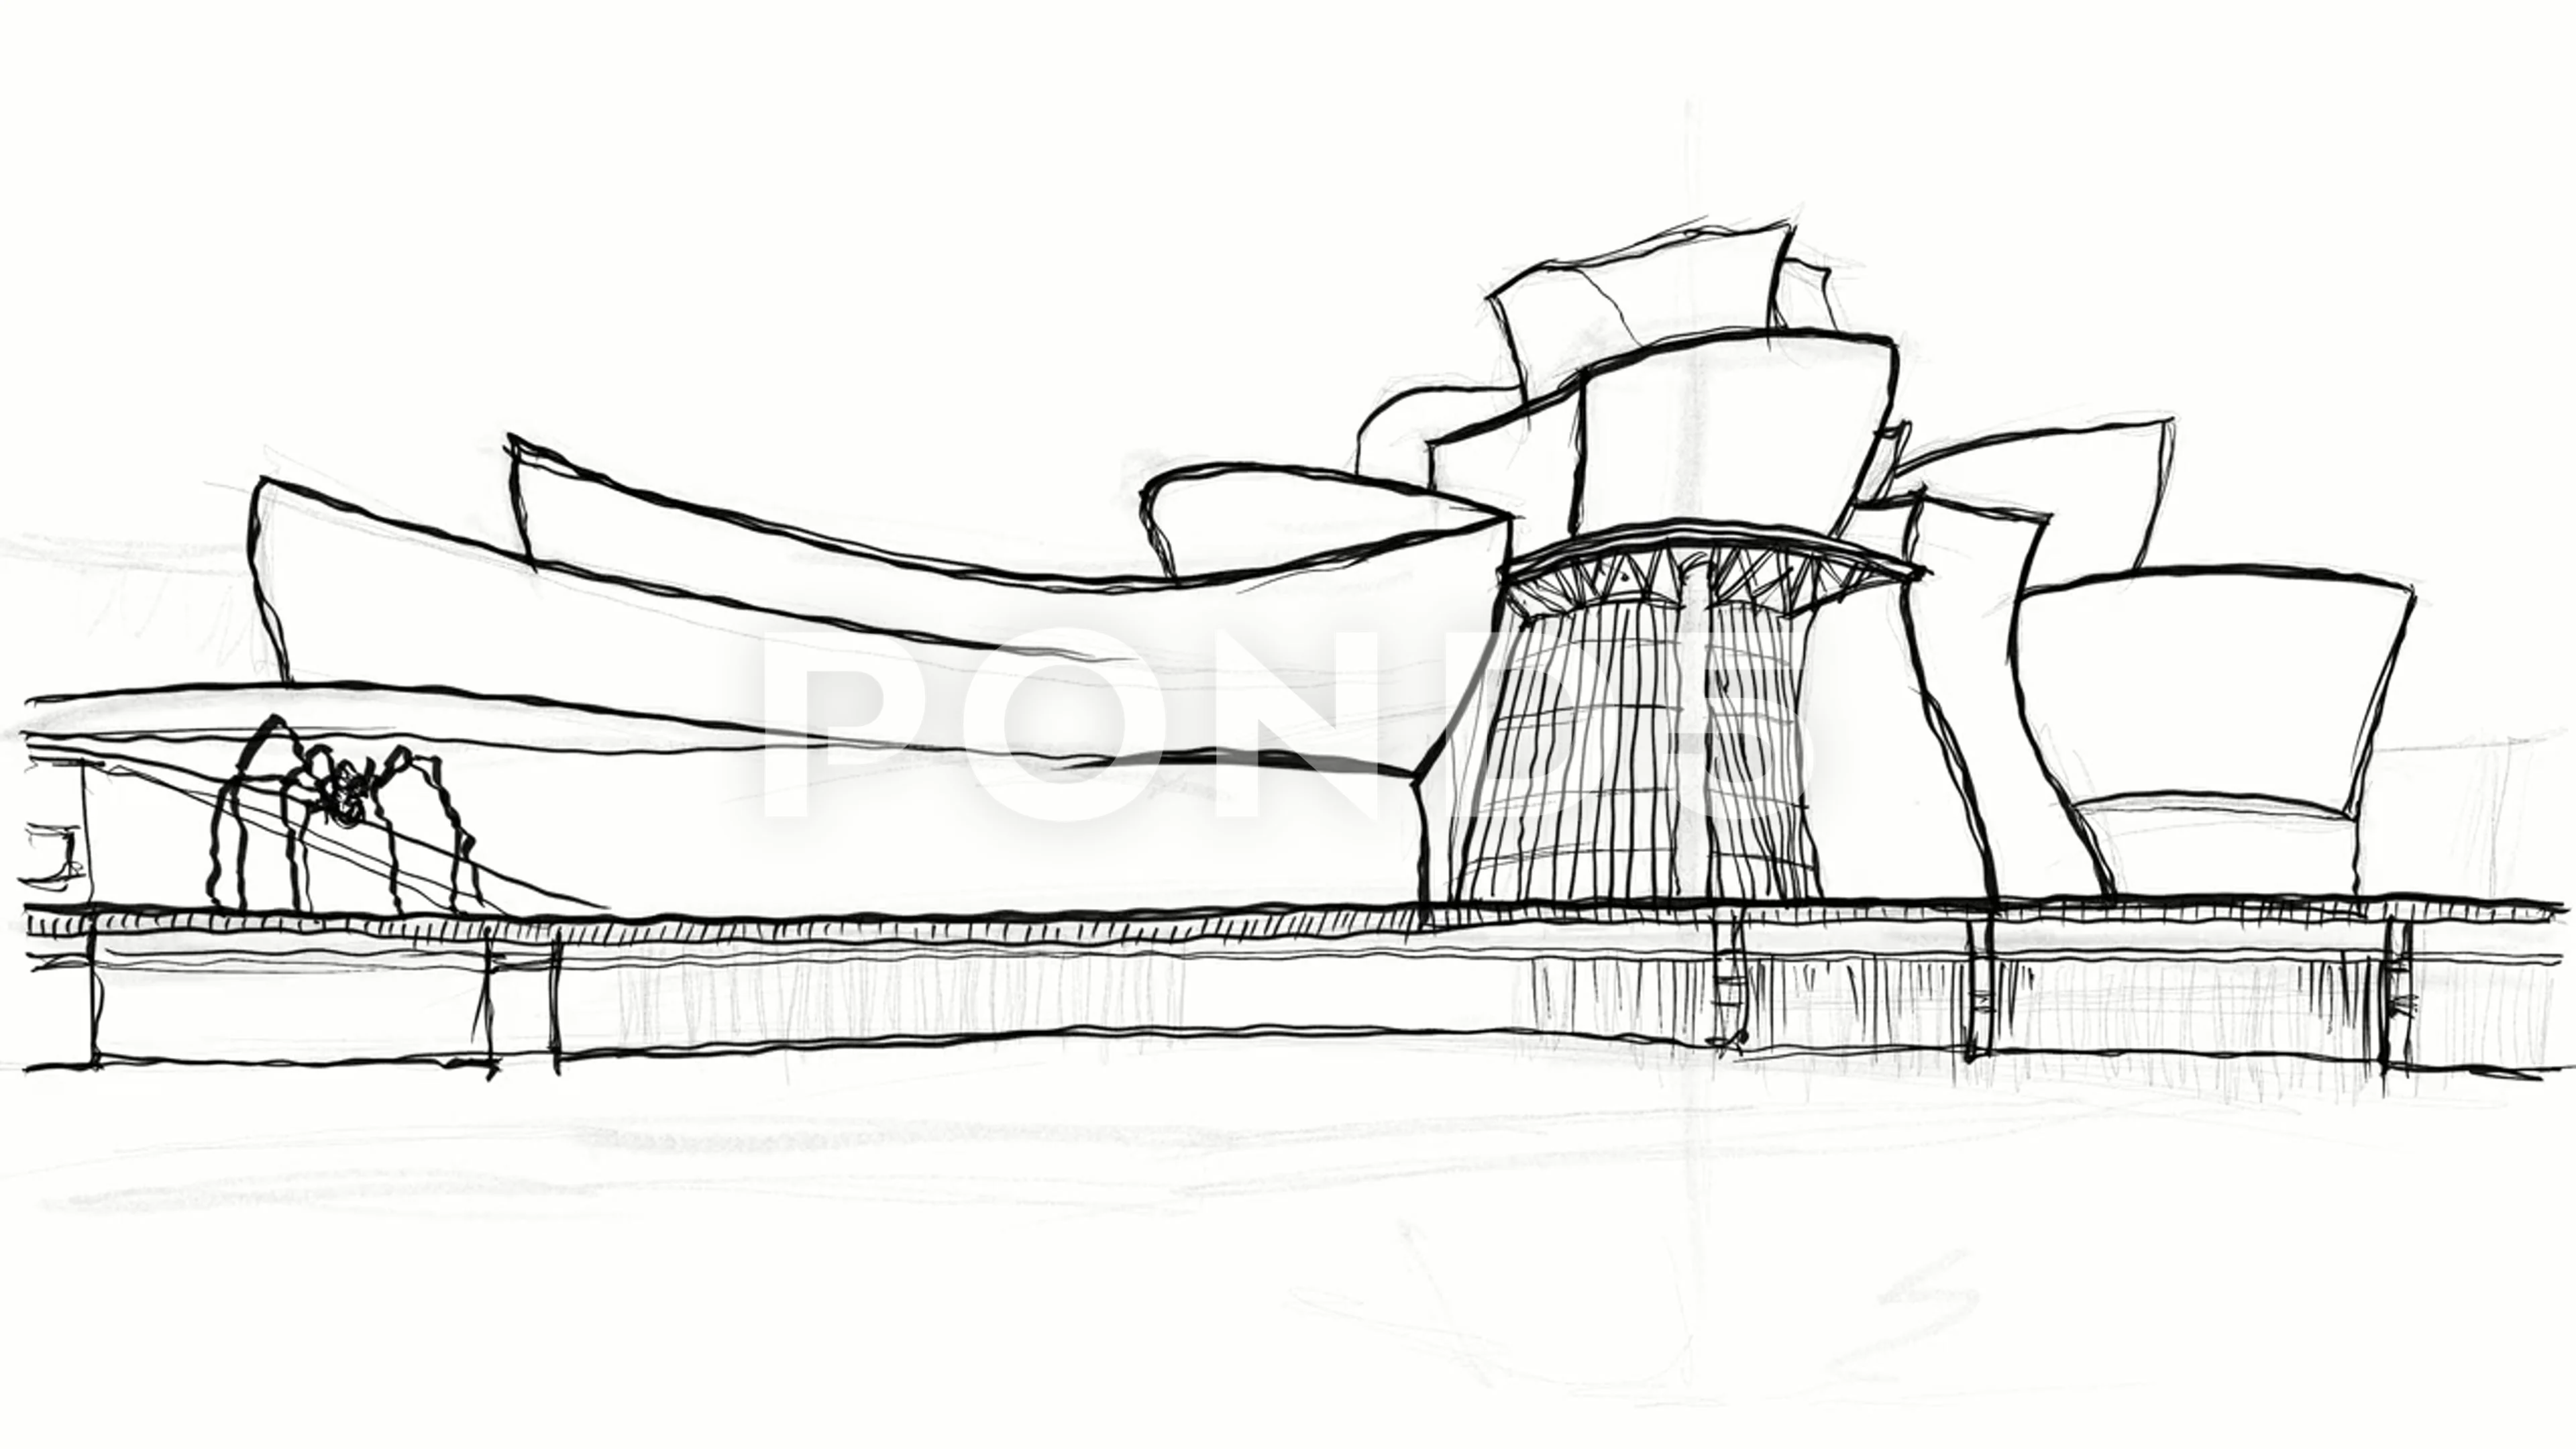 Drawing the Guggenheim New York Venice Bilbao  The Guggenheim Museums  and Foundation